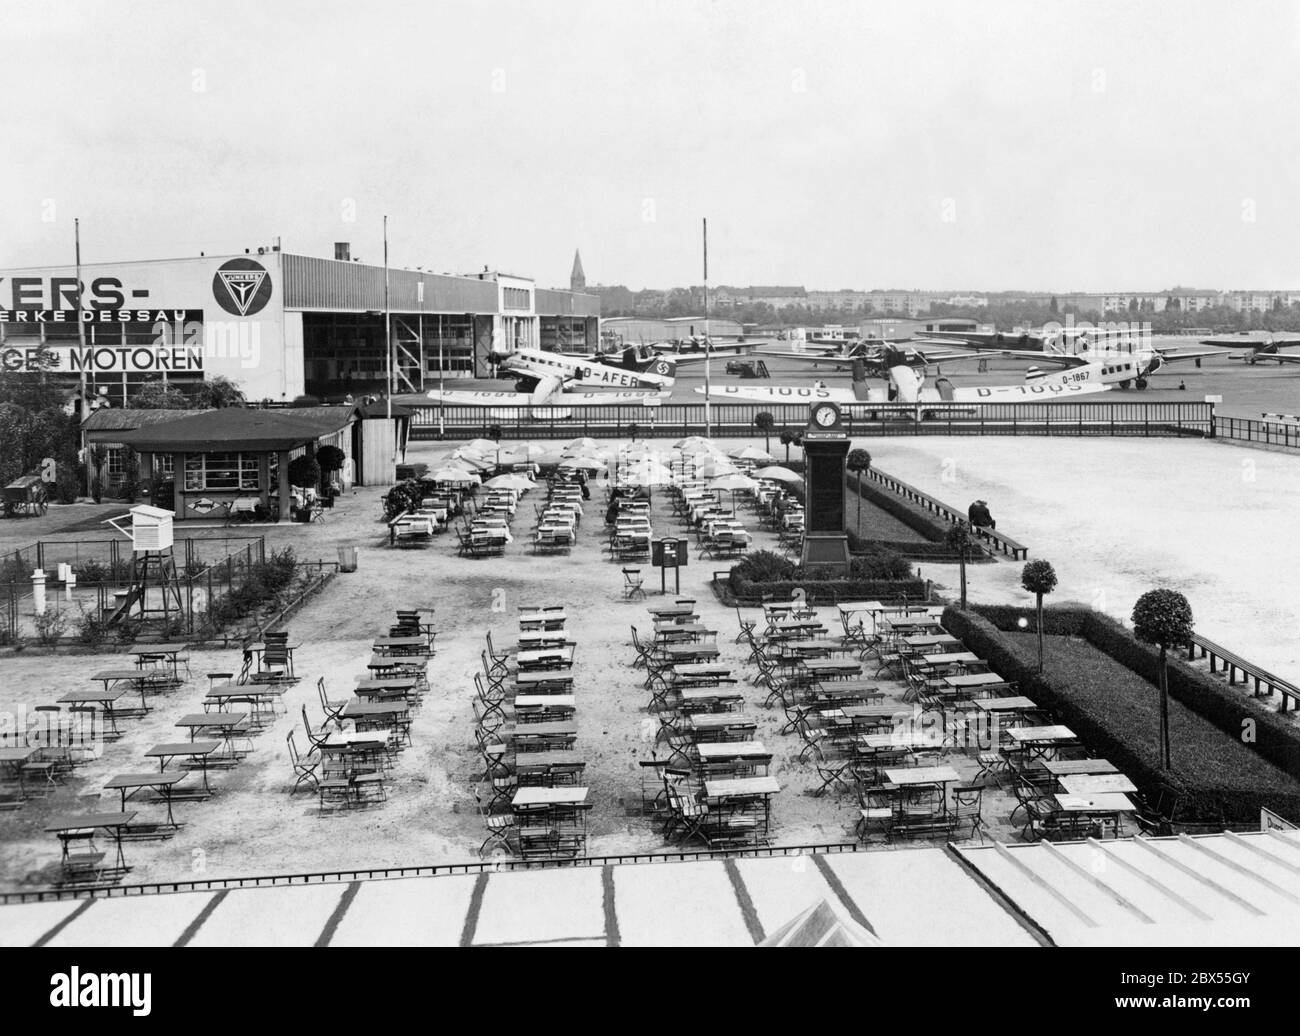 A view of the aircraft hangars from the command bridge. Stock Photo